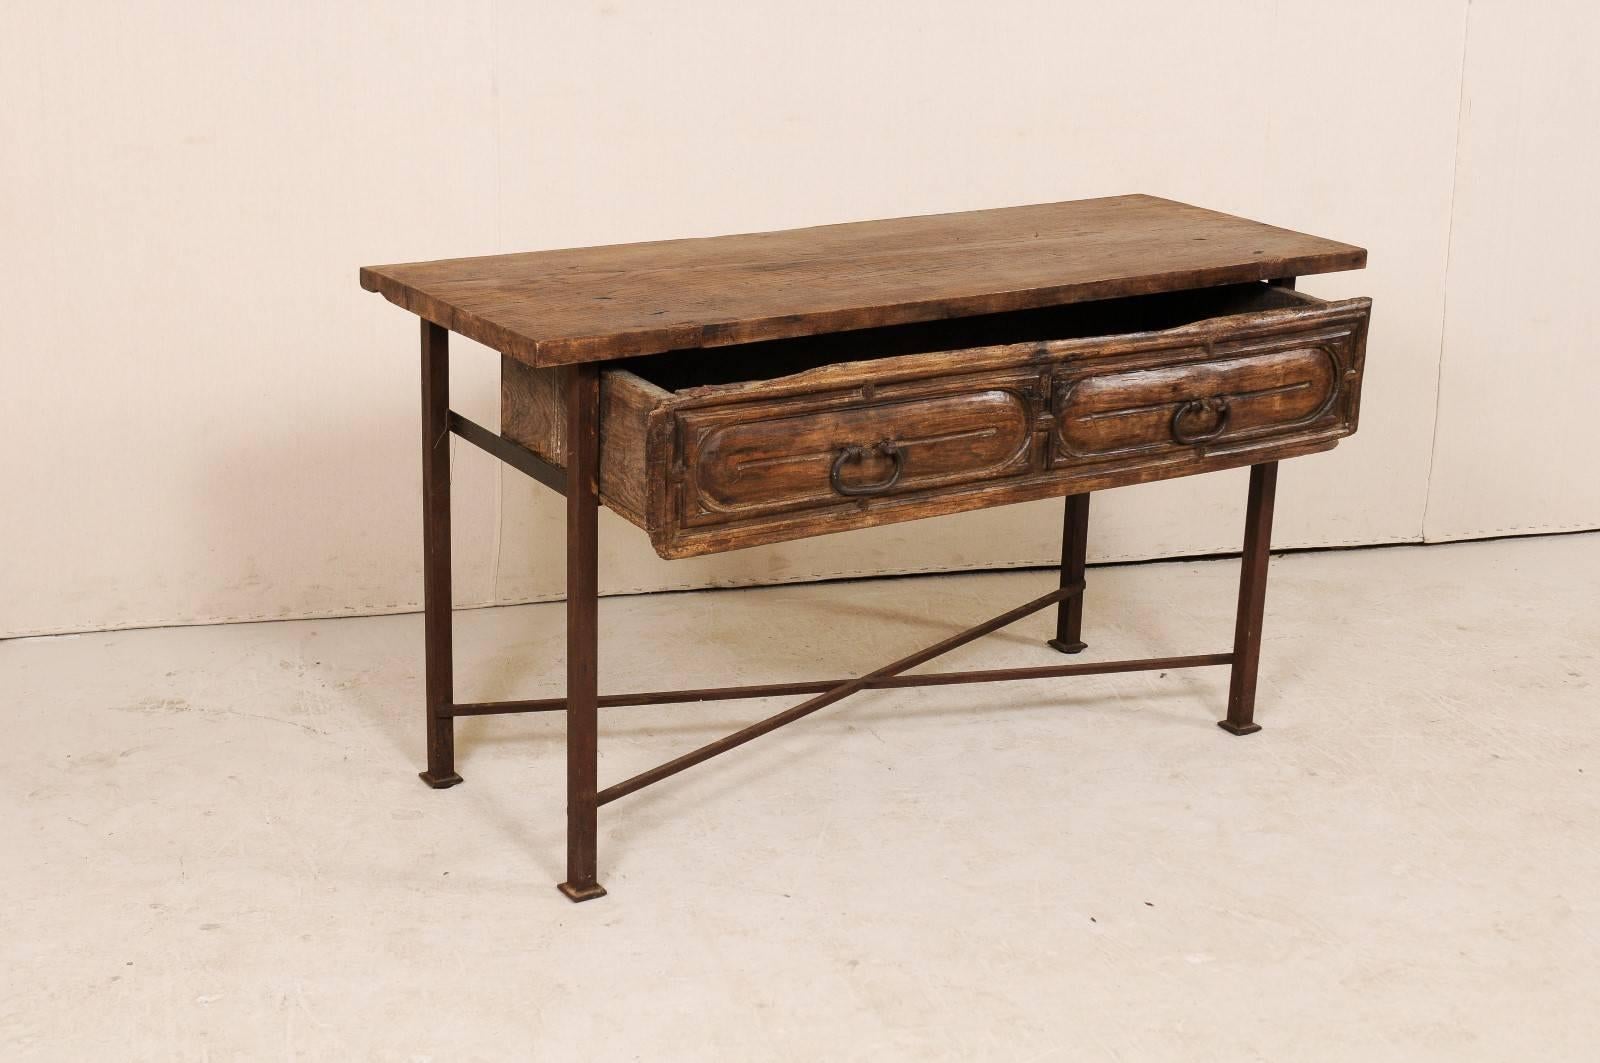 Forged 18th Century Exquisite Spanish Wood and Iron Console Table with Large Drawer